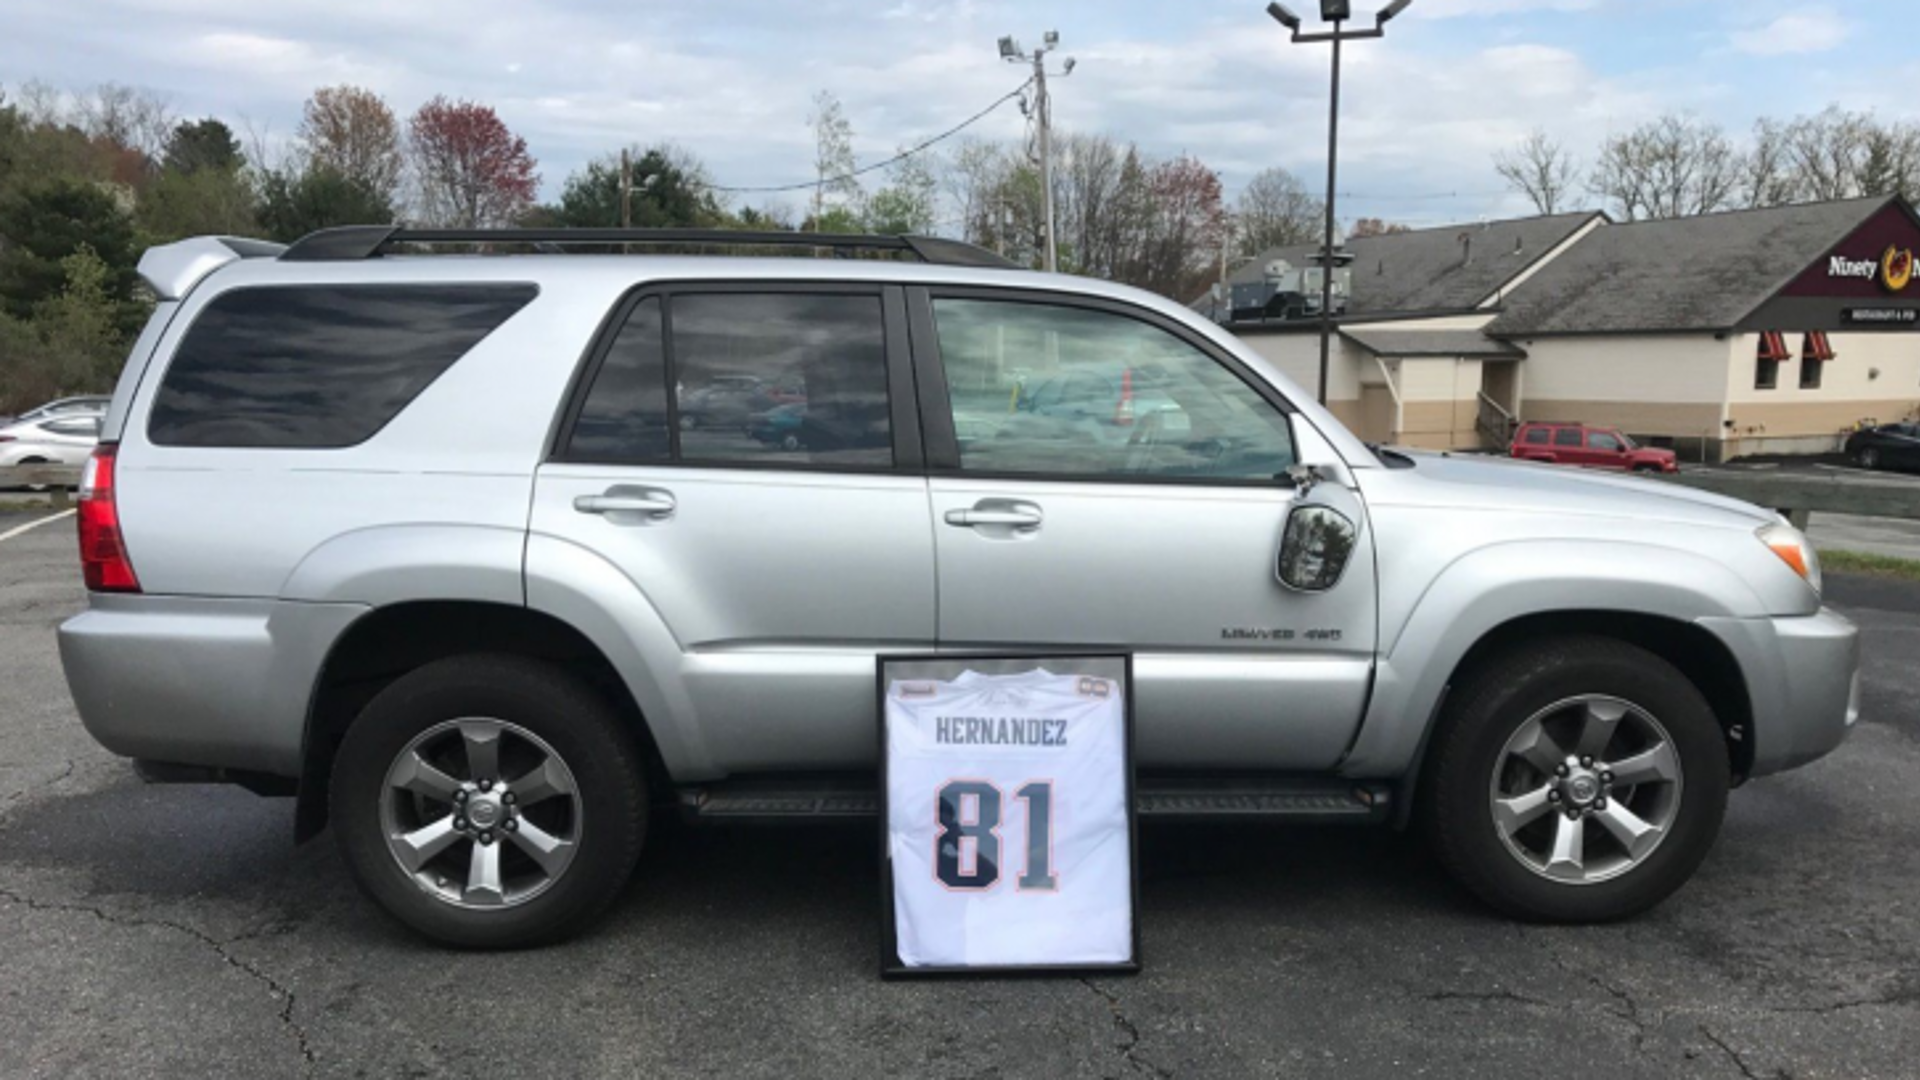 eBay Cancels Auction of Aaron Hernandez’s So-Called “Murder Car”